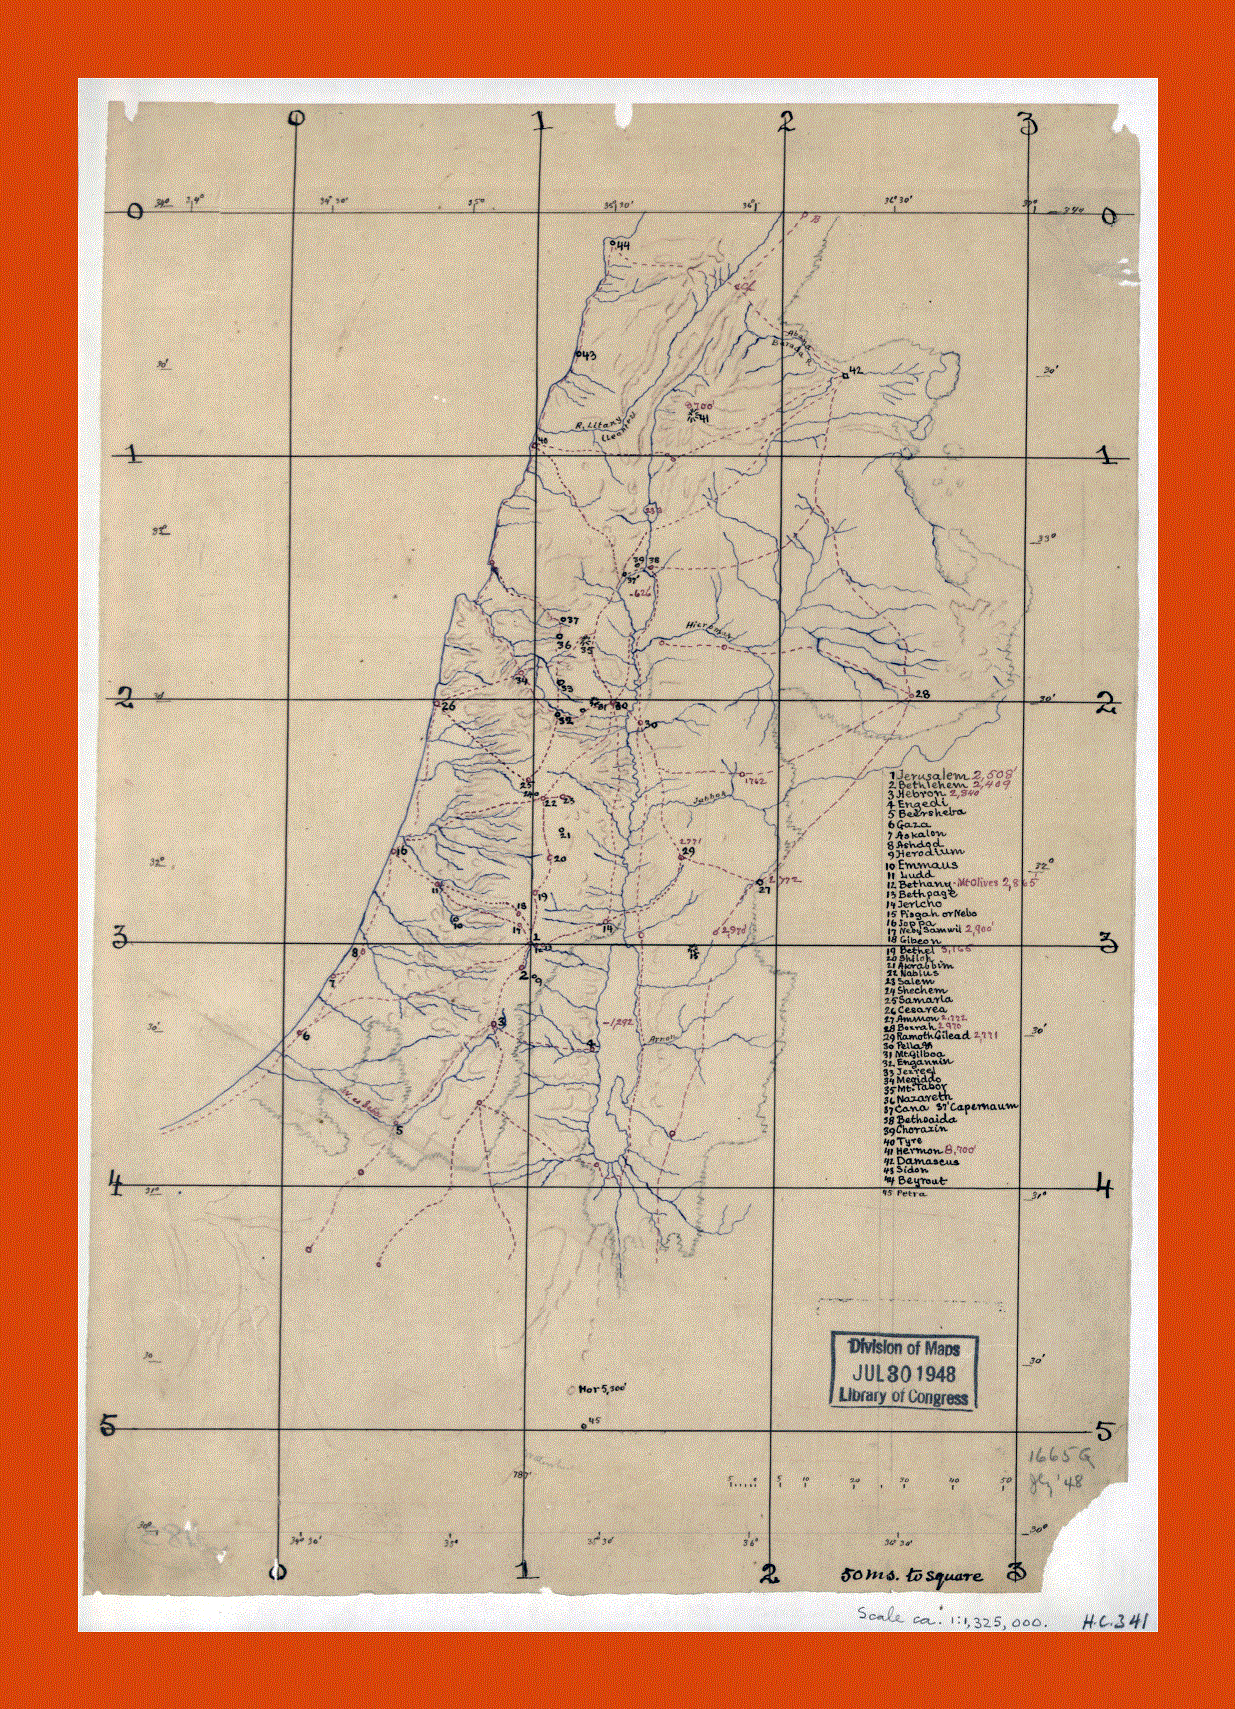 Old sketch map of Palestine - 188x